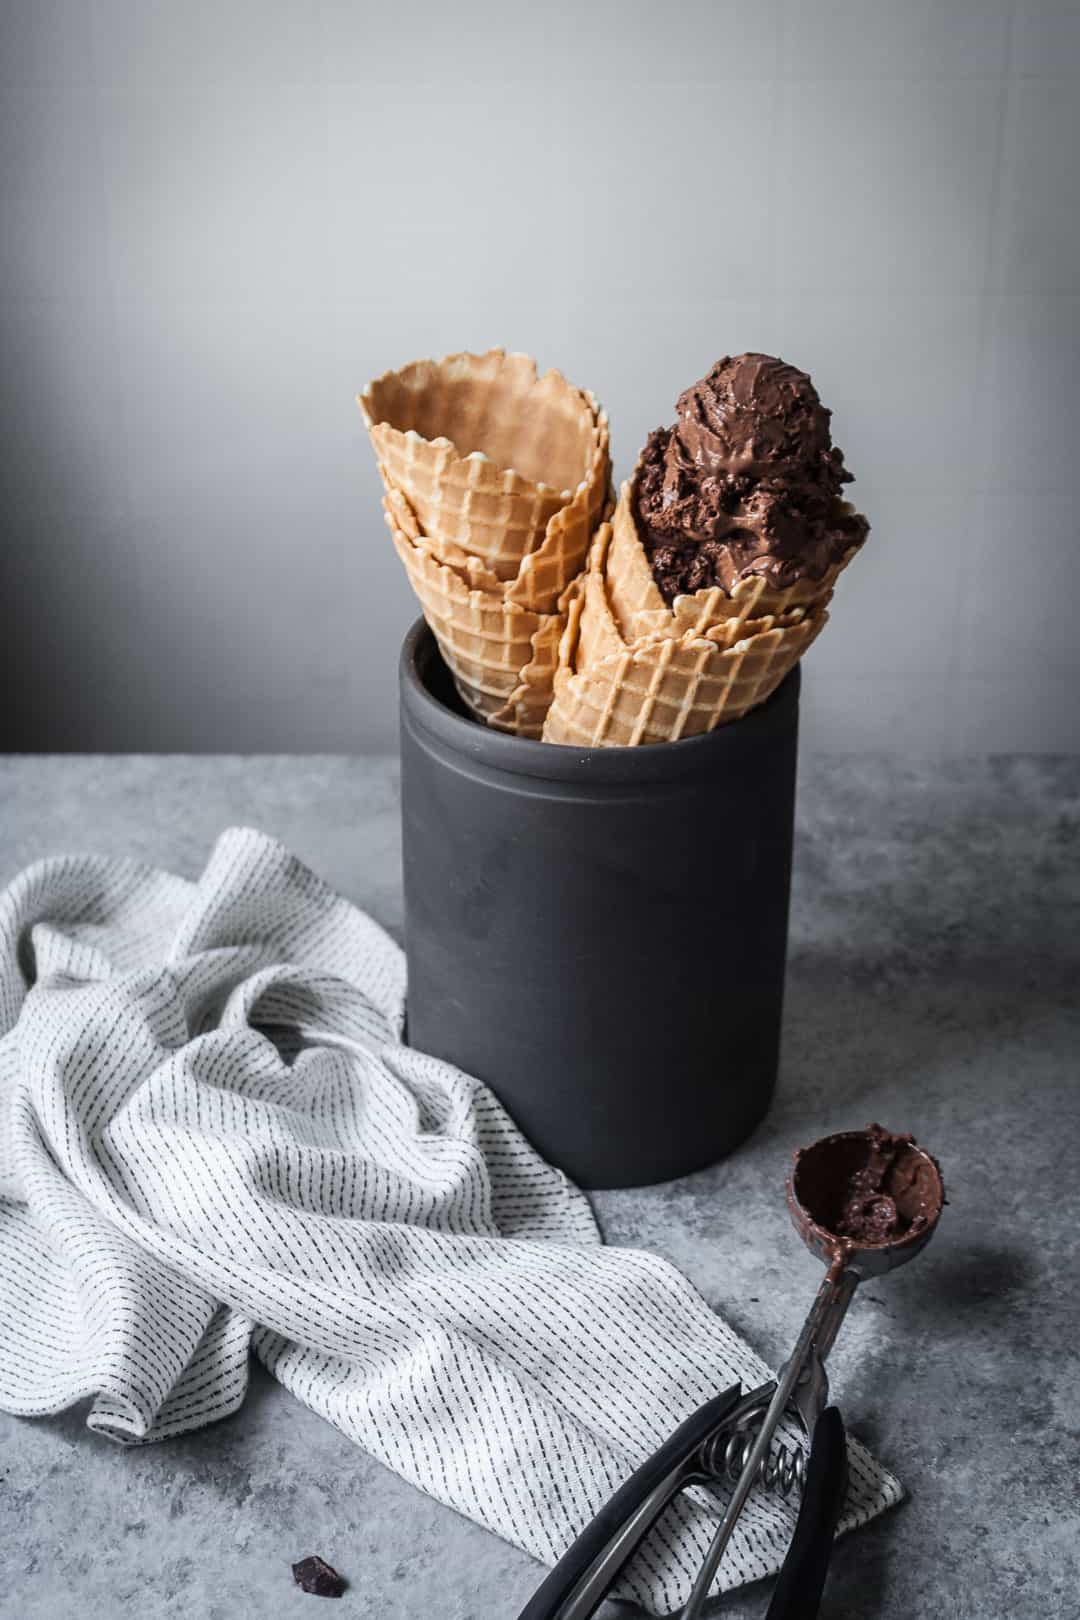 front view of waffle cones in black ceramic container with white kitchen cloth and ice cream scoop nearby